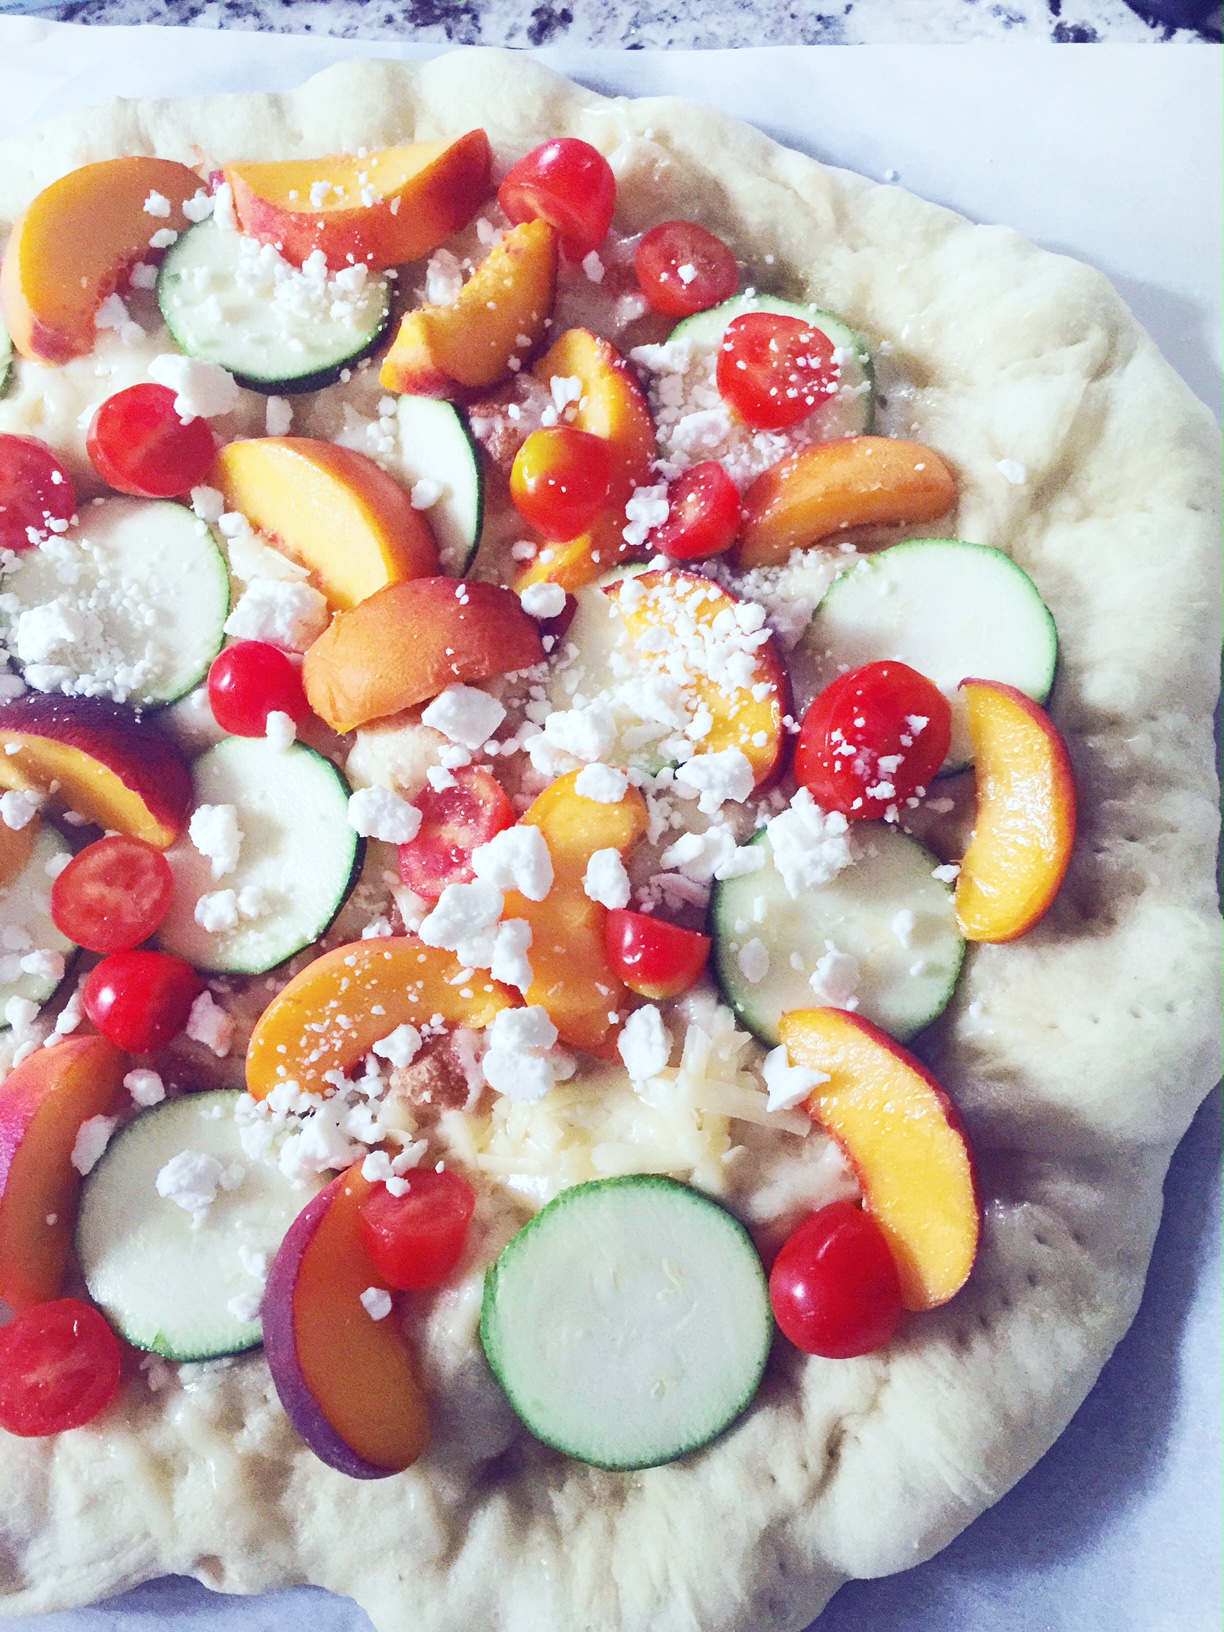 Our peach and zucchini summer pizza. 